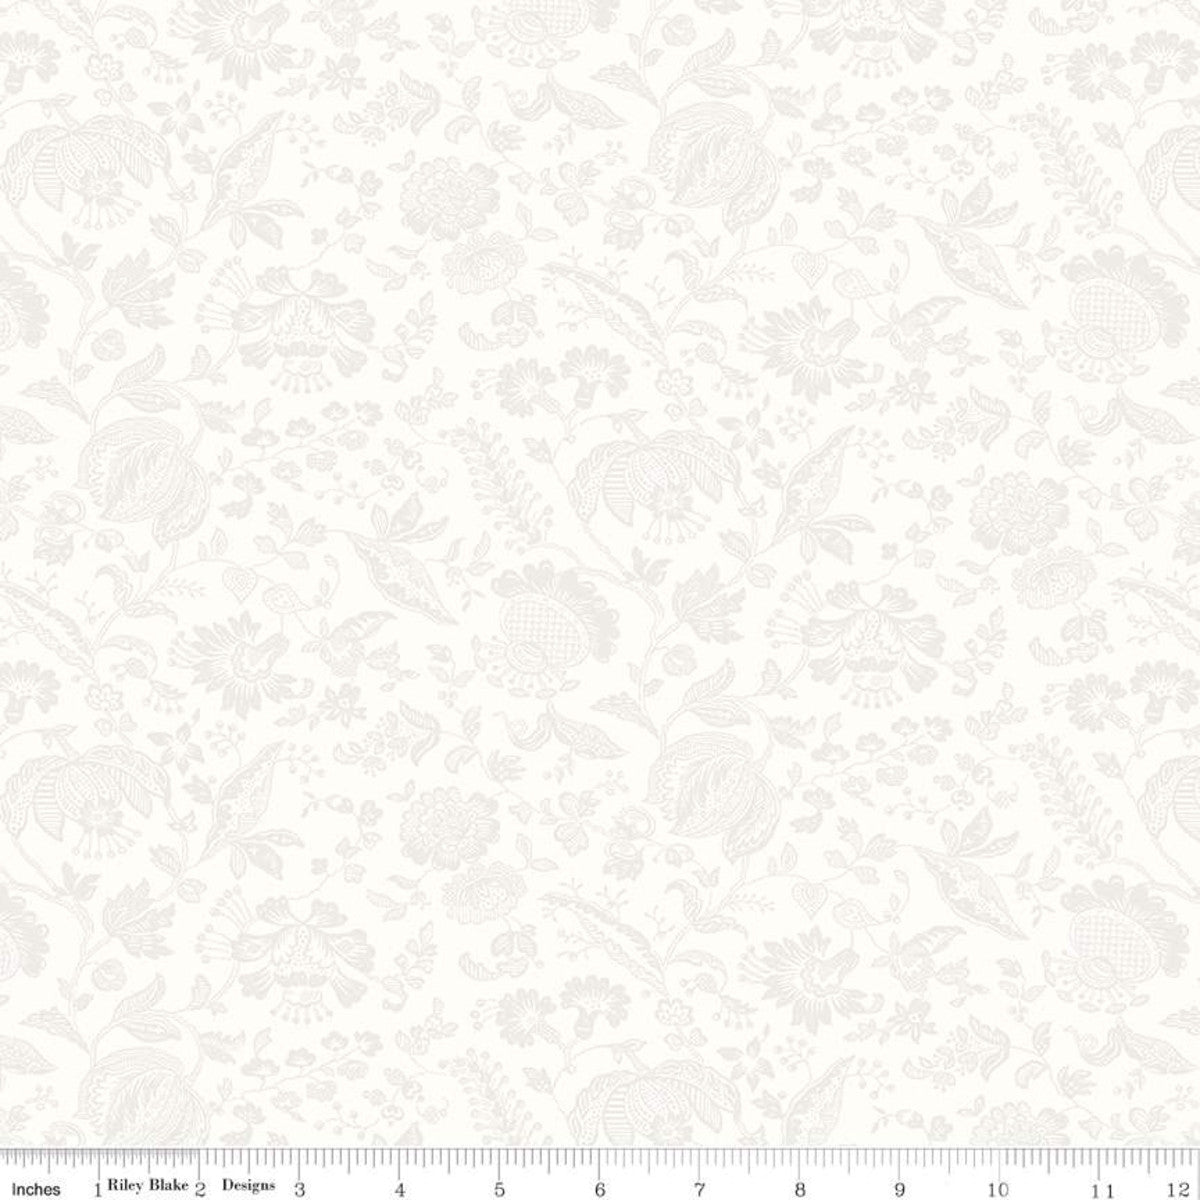 Liberty Fabrics Lasenby Silhouette Victoria Lace Floral P Yardage